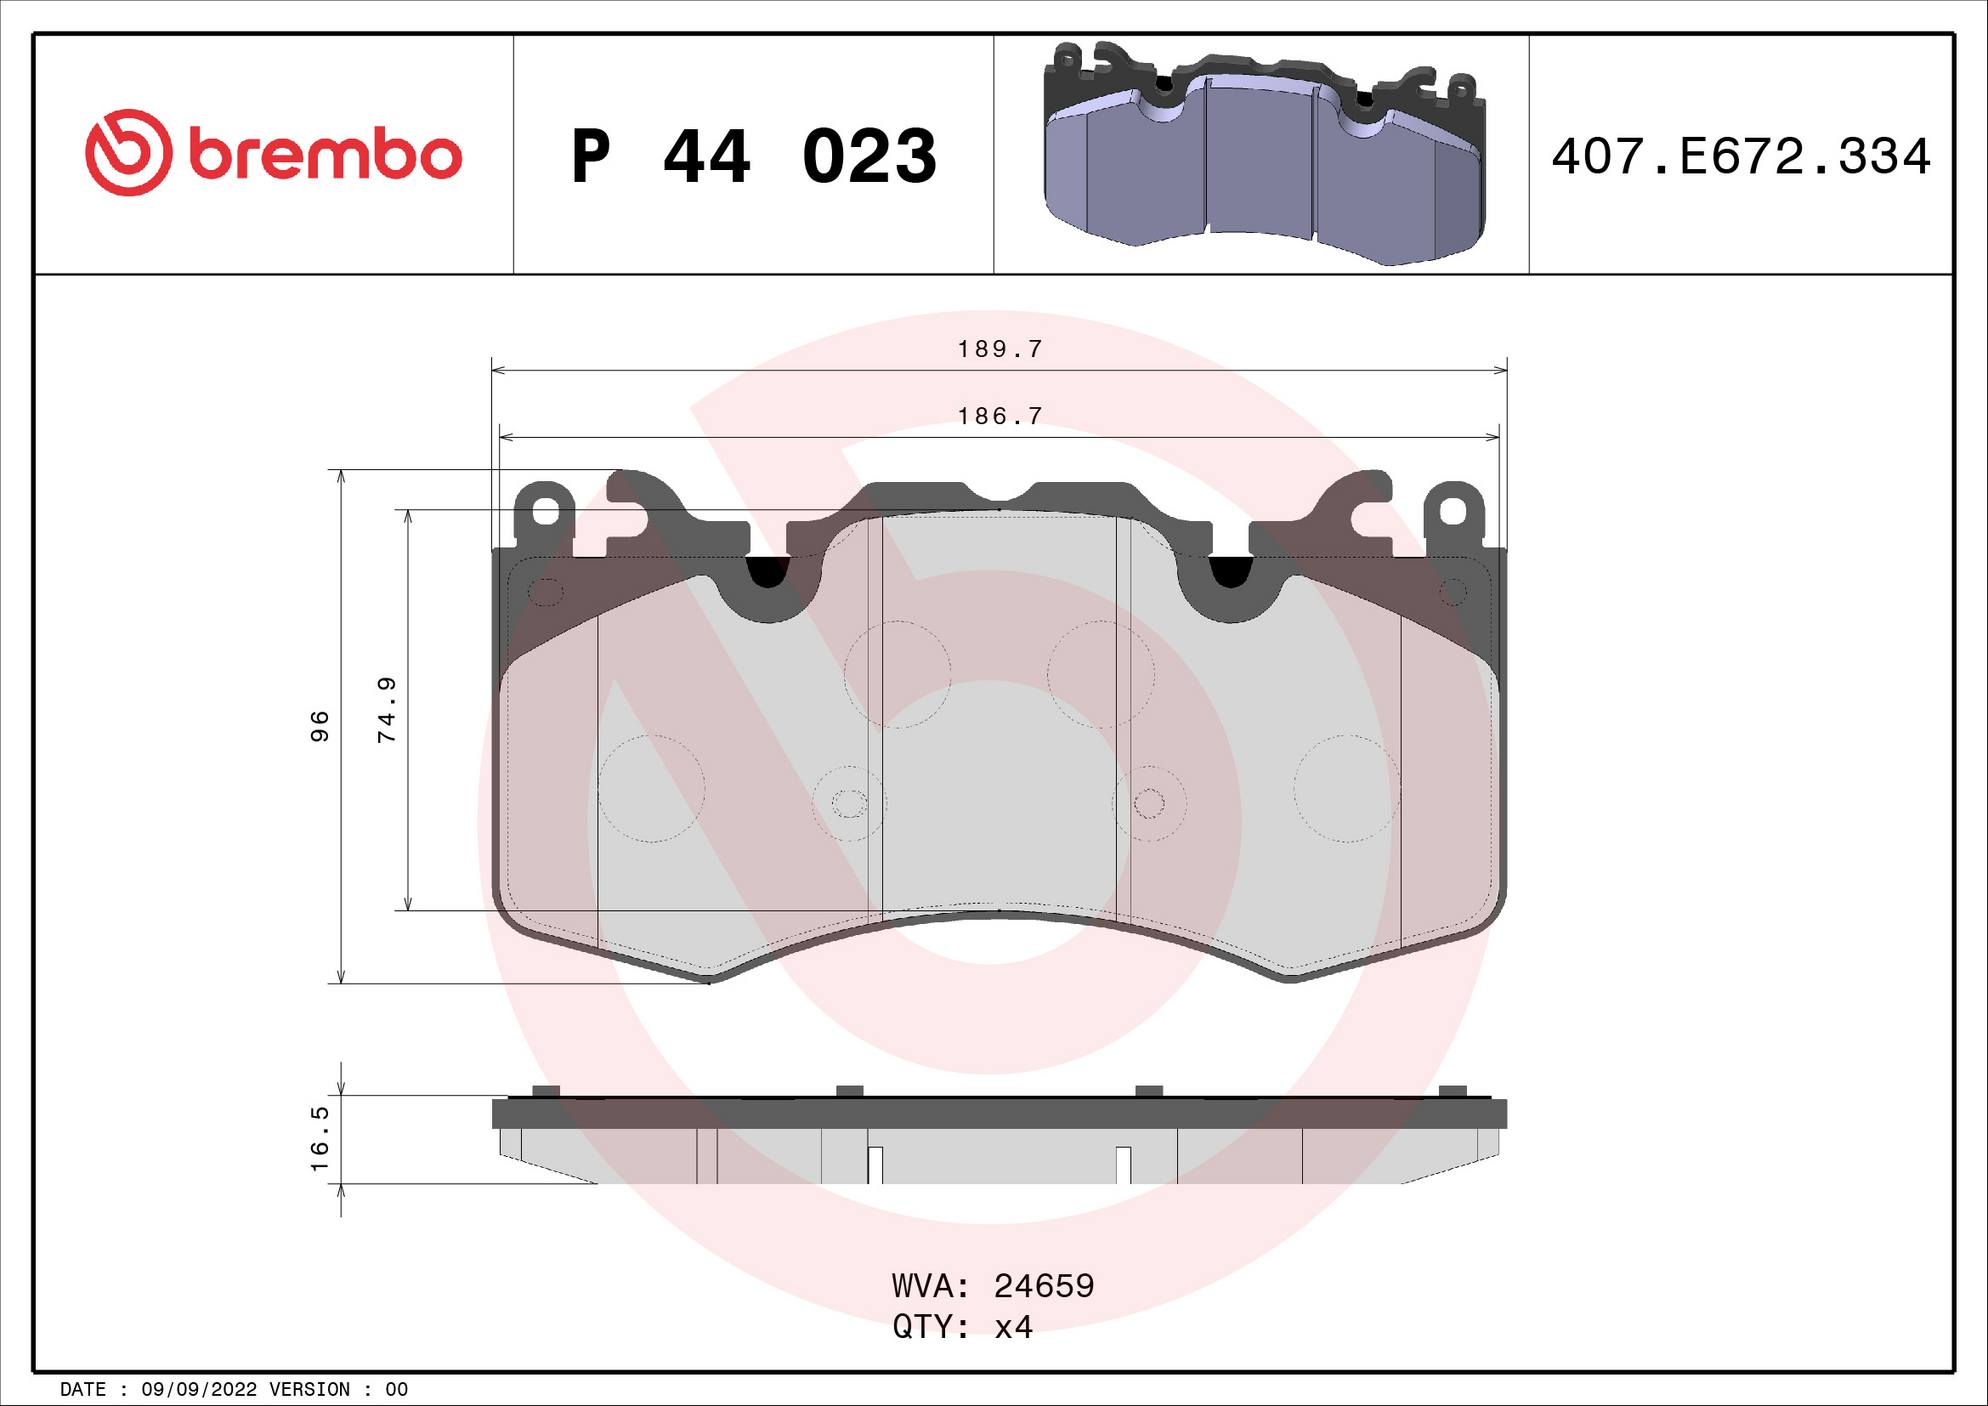 Land Rover Disc Brake Pad and Rotor Kit - Front (380mm) (Low-Met) Brembo